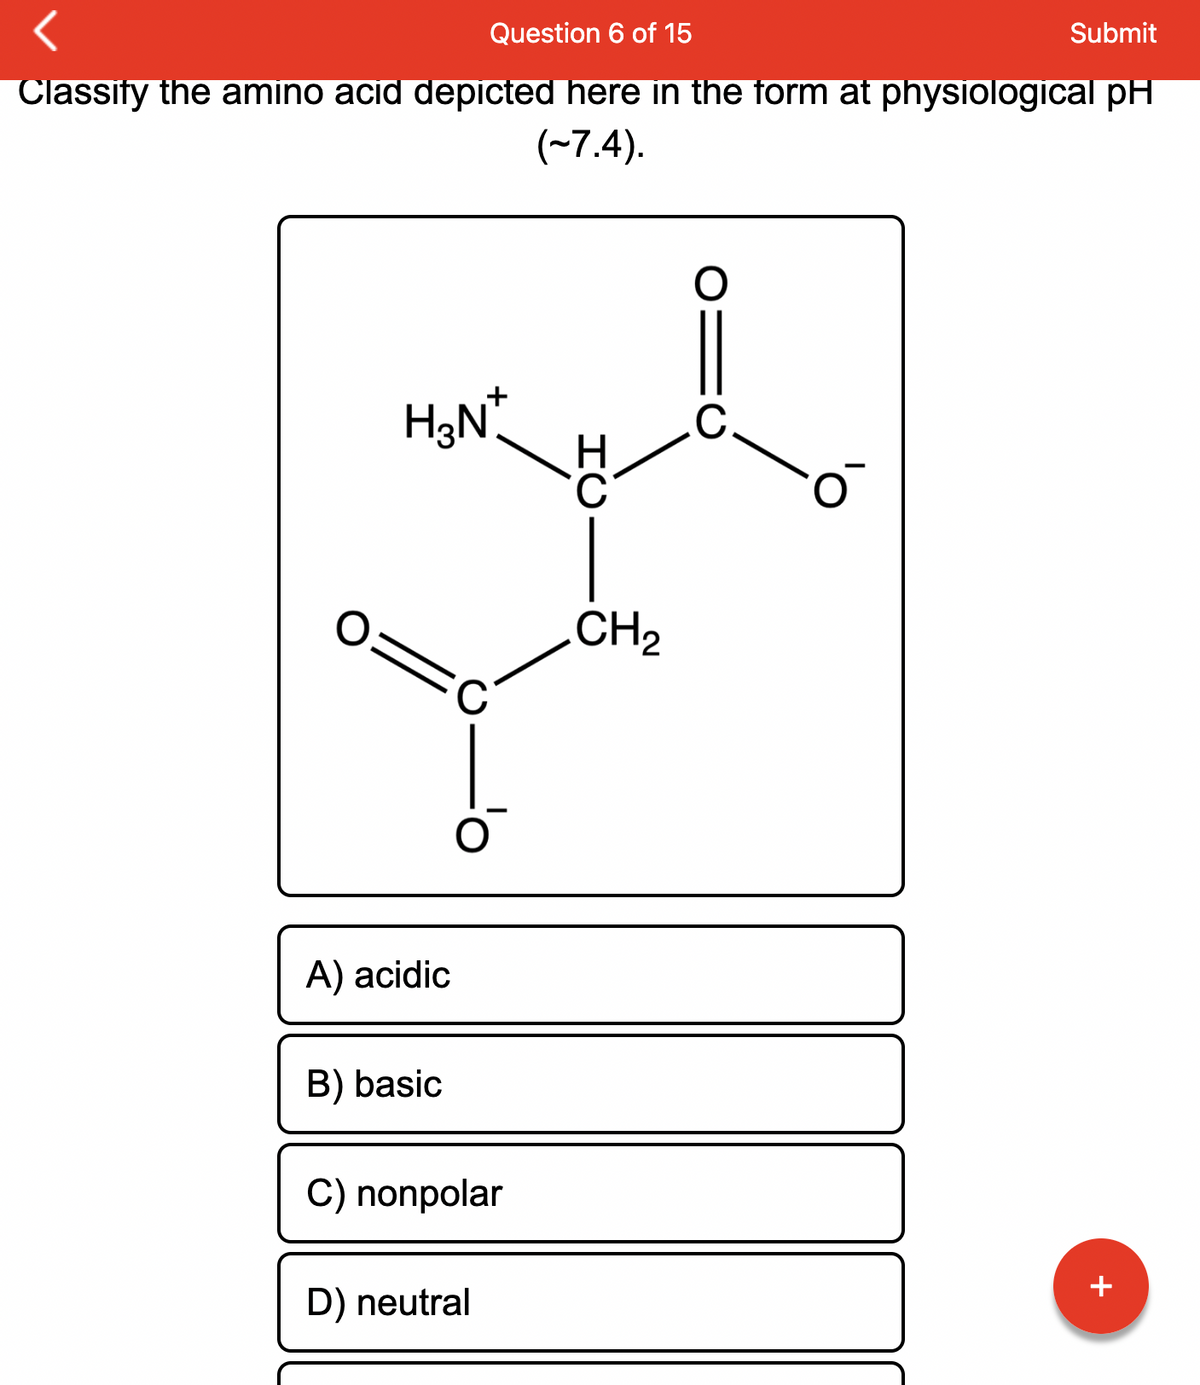 Question 6 of 15
Submit
Classify the amino acid depicted here in the form at physiological pH
(~7.4).
O:
H₂N*
A) acidic
B) basic
C
O
C) nonpolar
D) neutral
HU
CH₂
O
C
JU
+